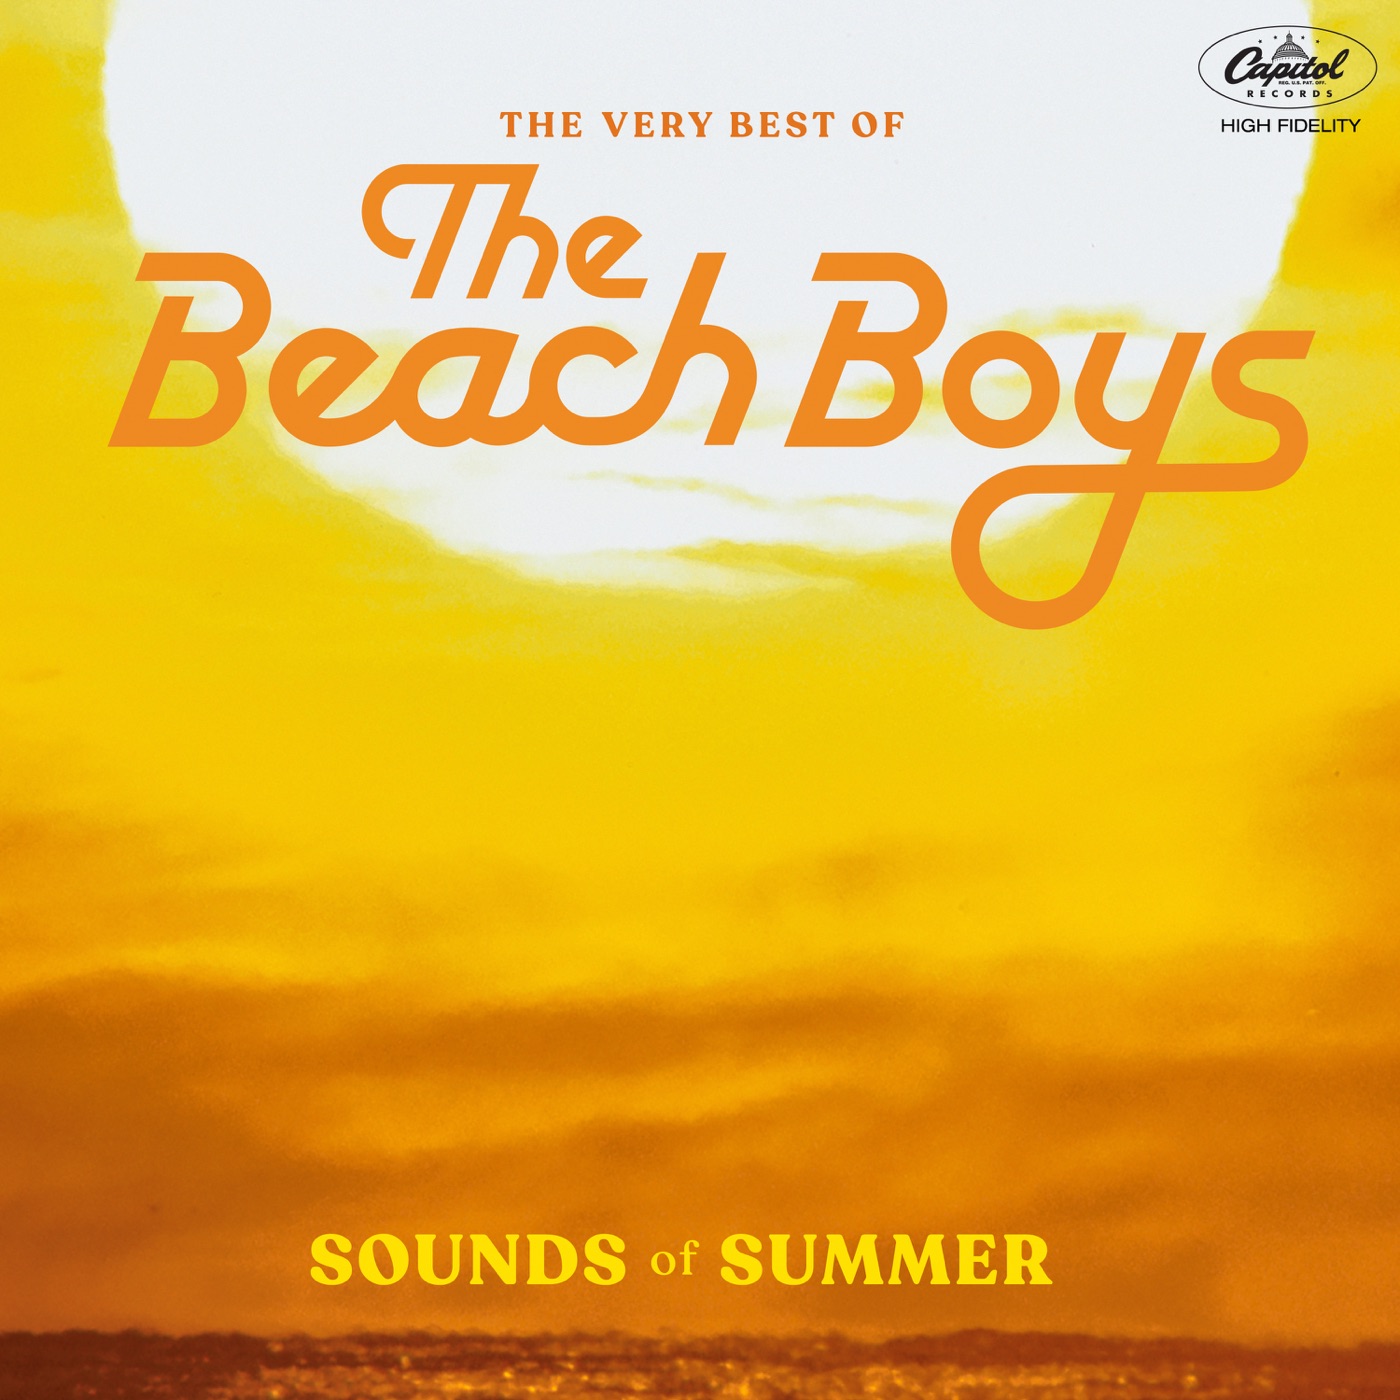 Sounds of Summer: The Very Best of the Beach Boys by The Beach Boys